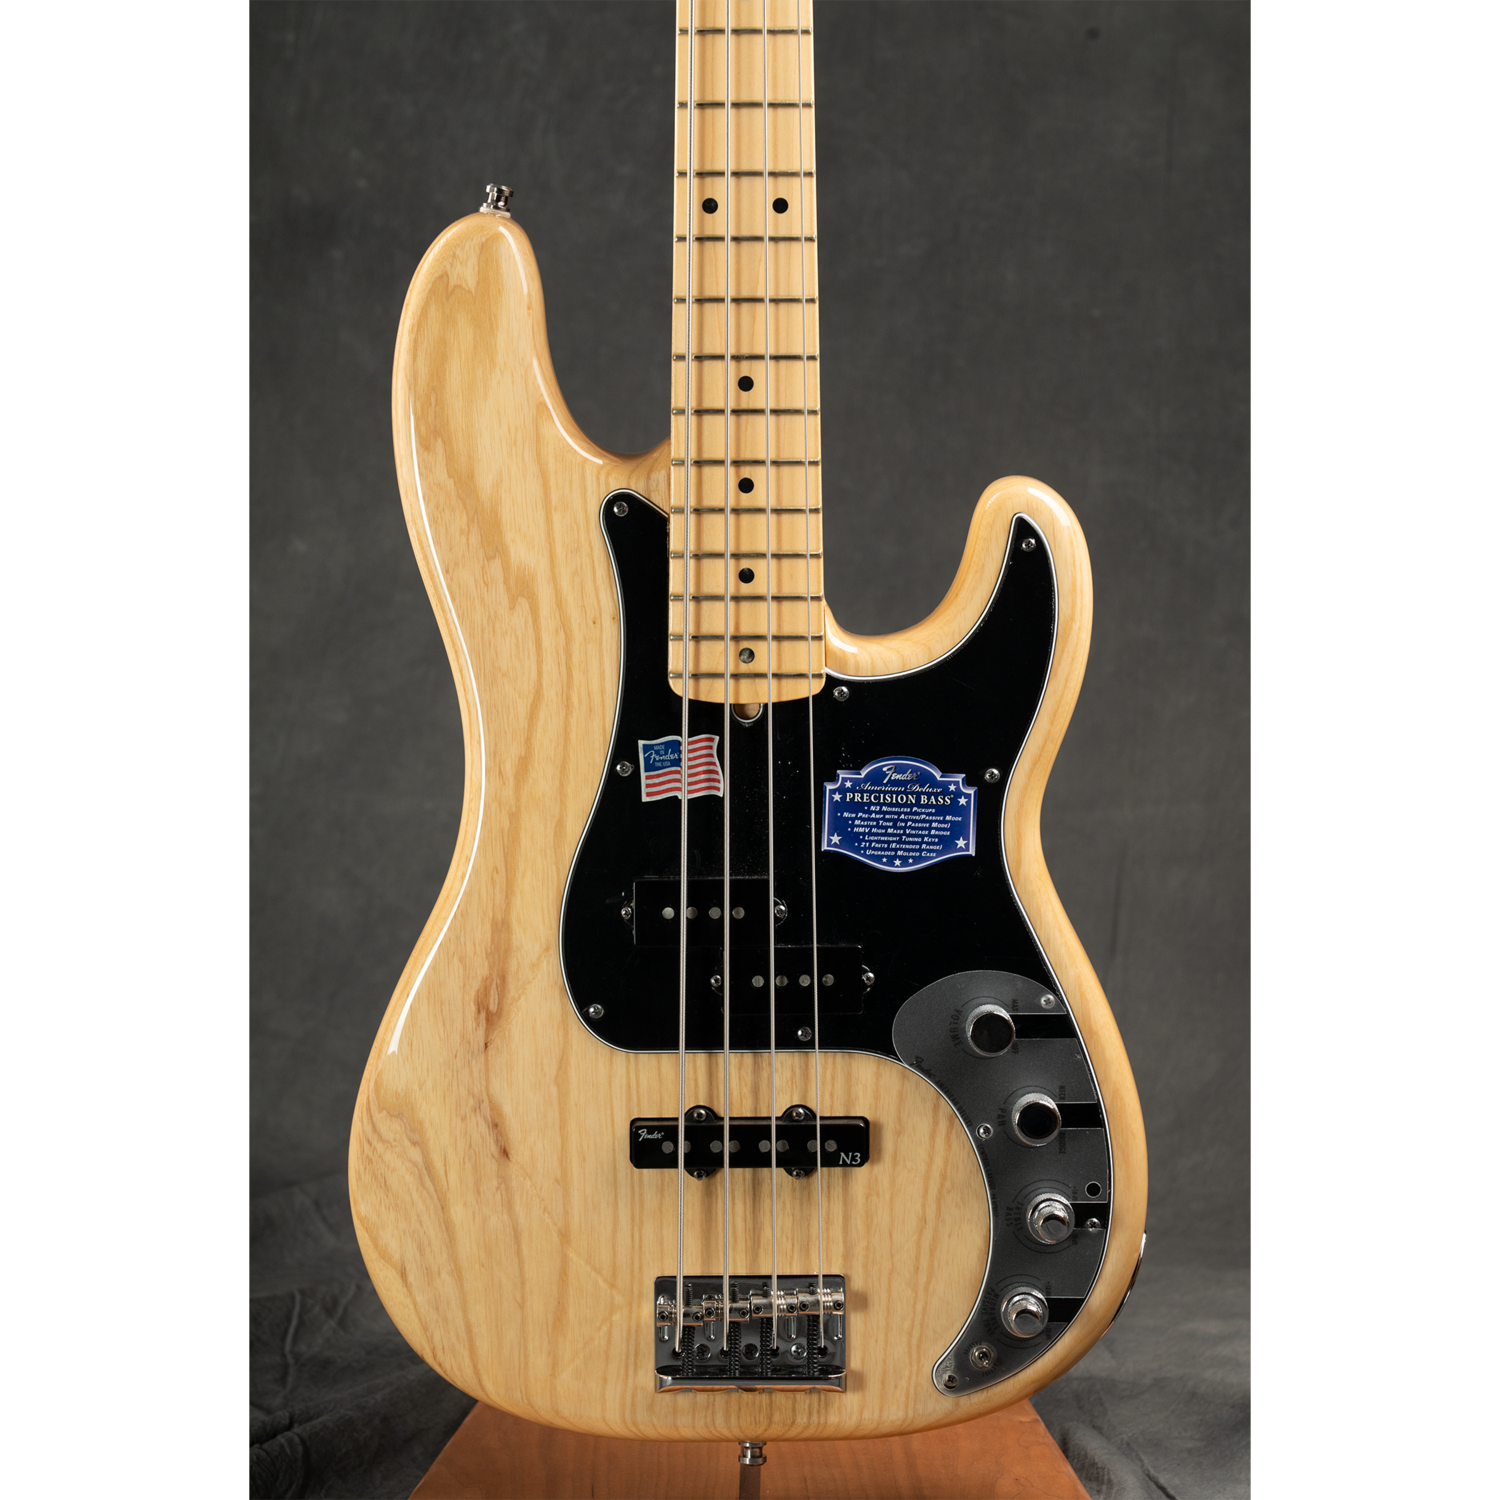 Station limit Affectionate 2011 FENDER 60TH ANNIVERSARY AMERICAN DELUXE PRECISION BASS — The  RareGuitarsofa / Hong kong